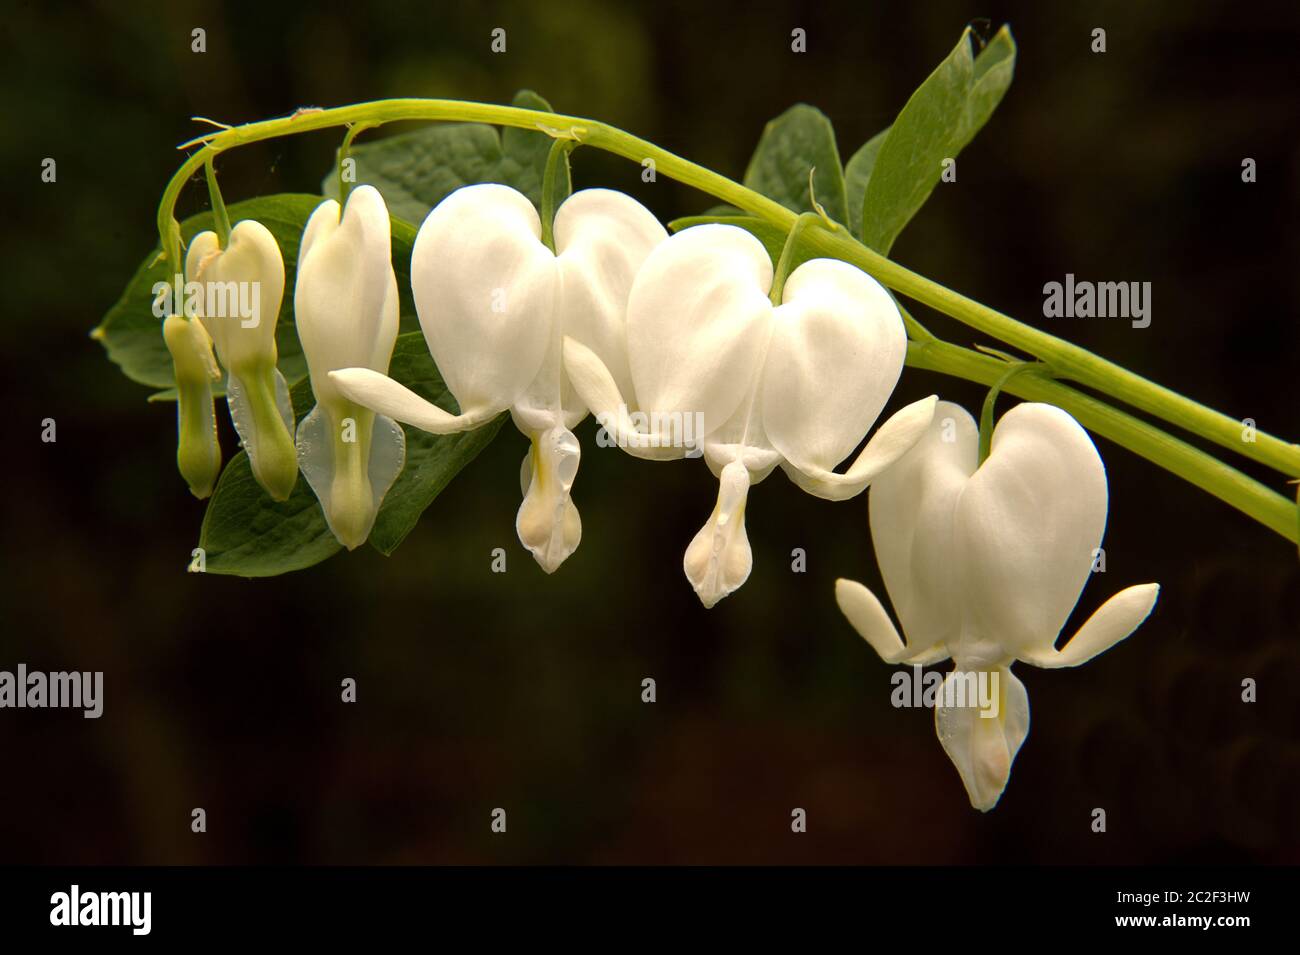 Closeup of spring-blooming white bleeding heart (Dicentra spectabilis) with heart-shaped flowers dangling from long arching stem with dark background. Stock Photo